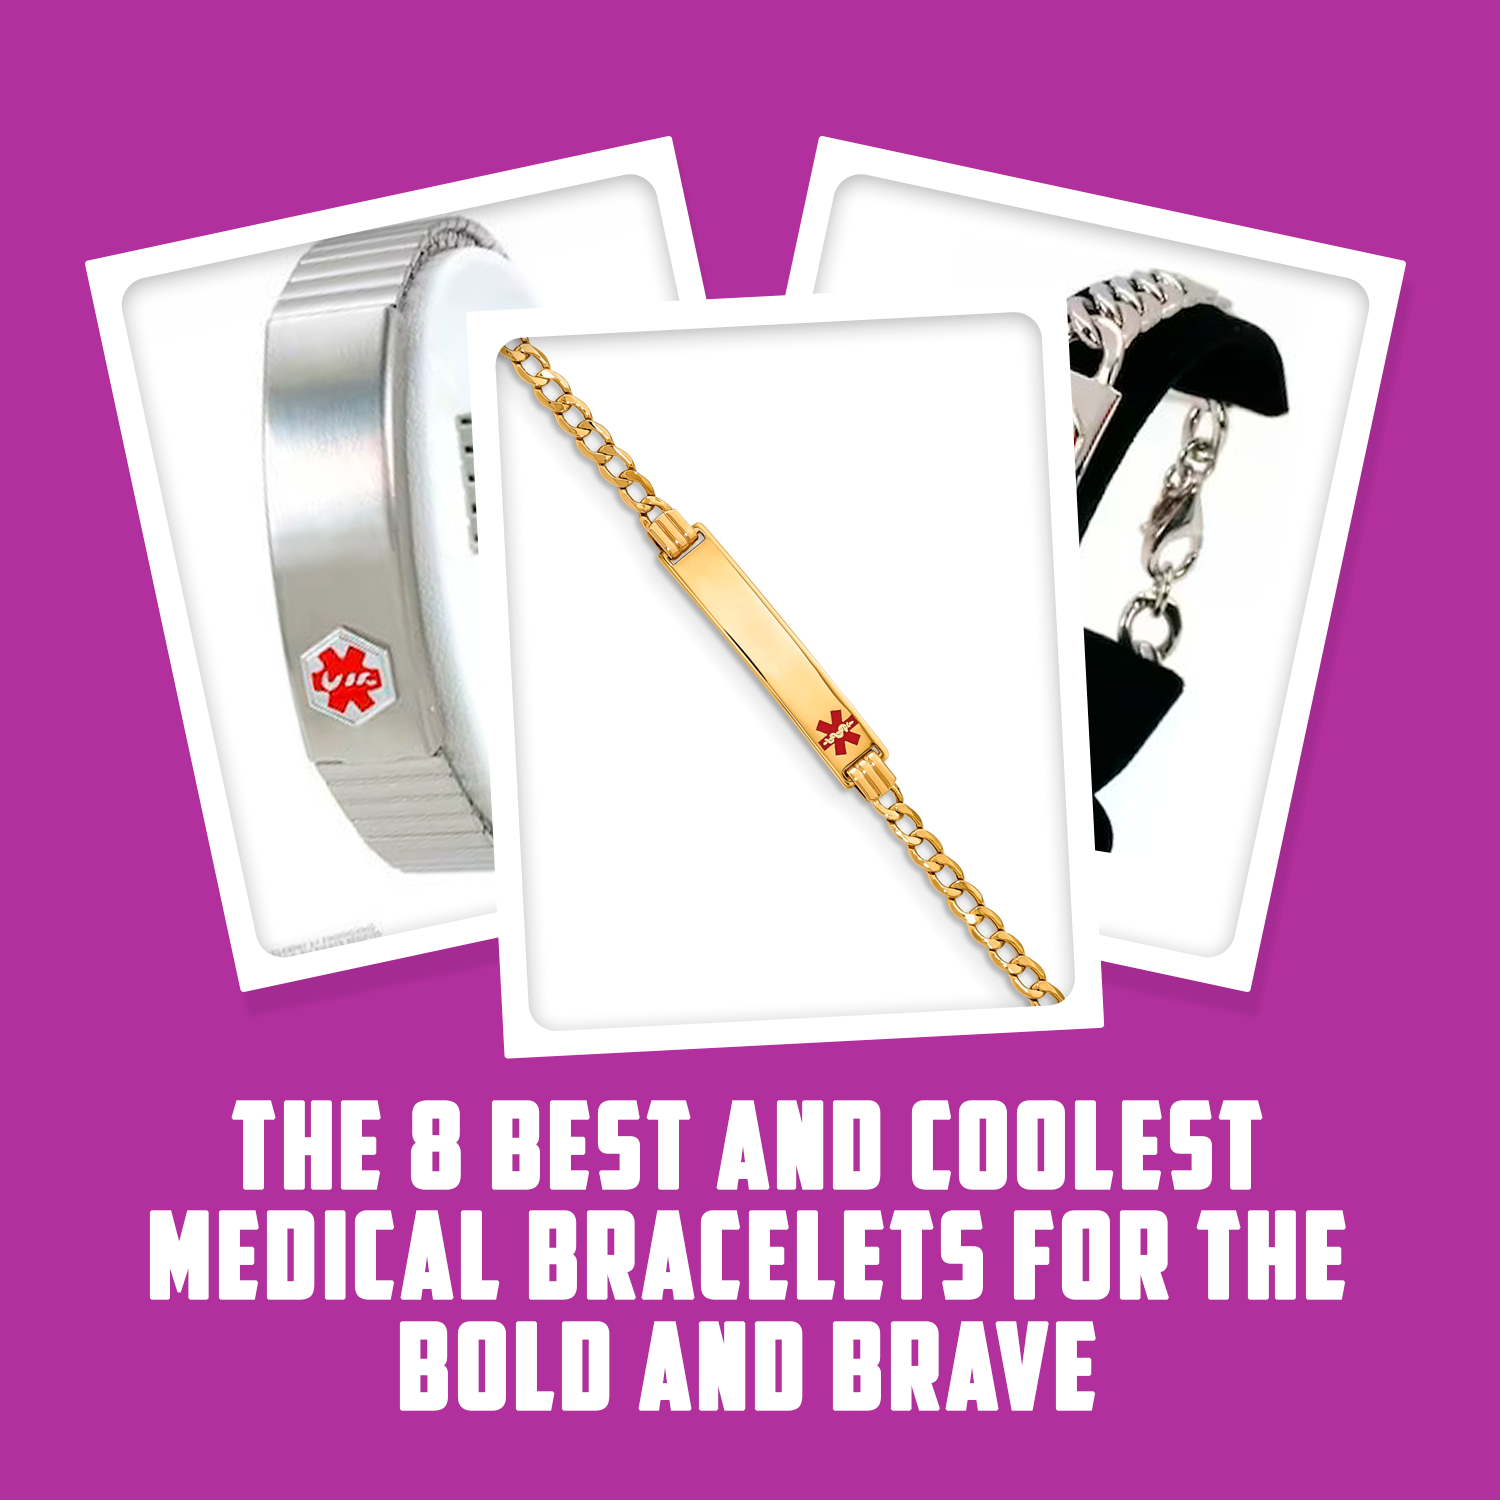 The 8 Best and Coolest Medical Bracelets for the Bold and Brave